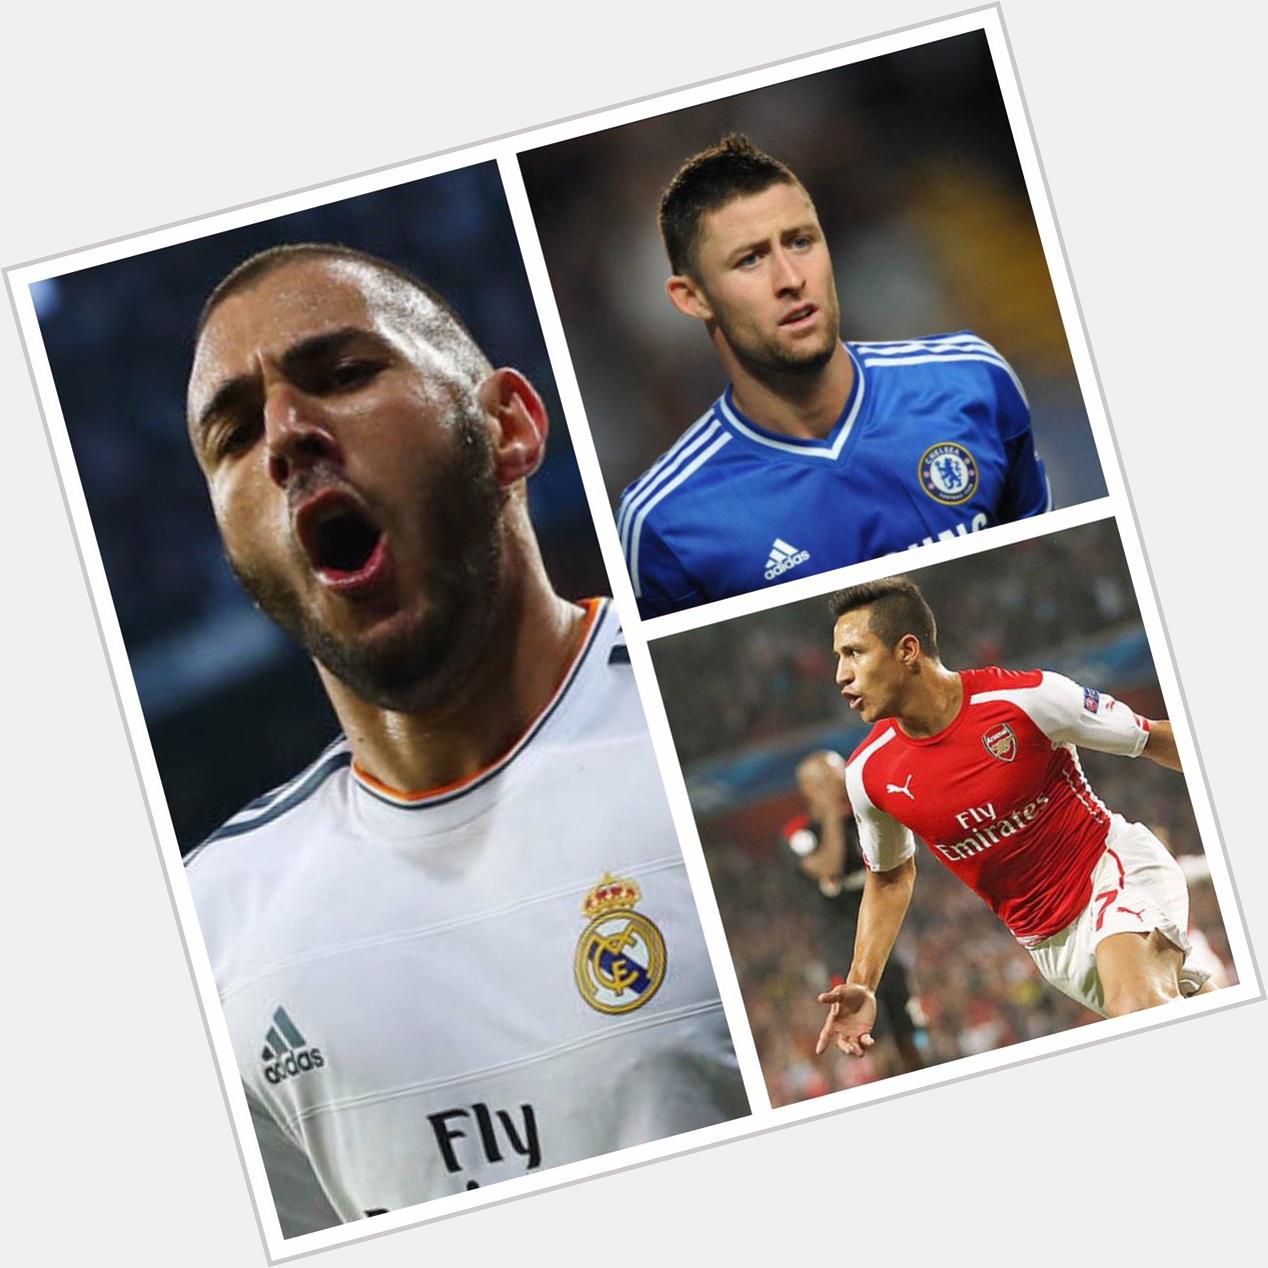 " HAPPY BIRTHDAY! To Arsenals Alexis Sanchez, Real Madrids Karim Benzema and Chelseas Gary Cahill! 